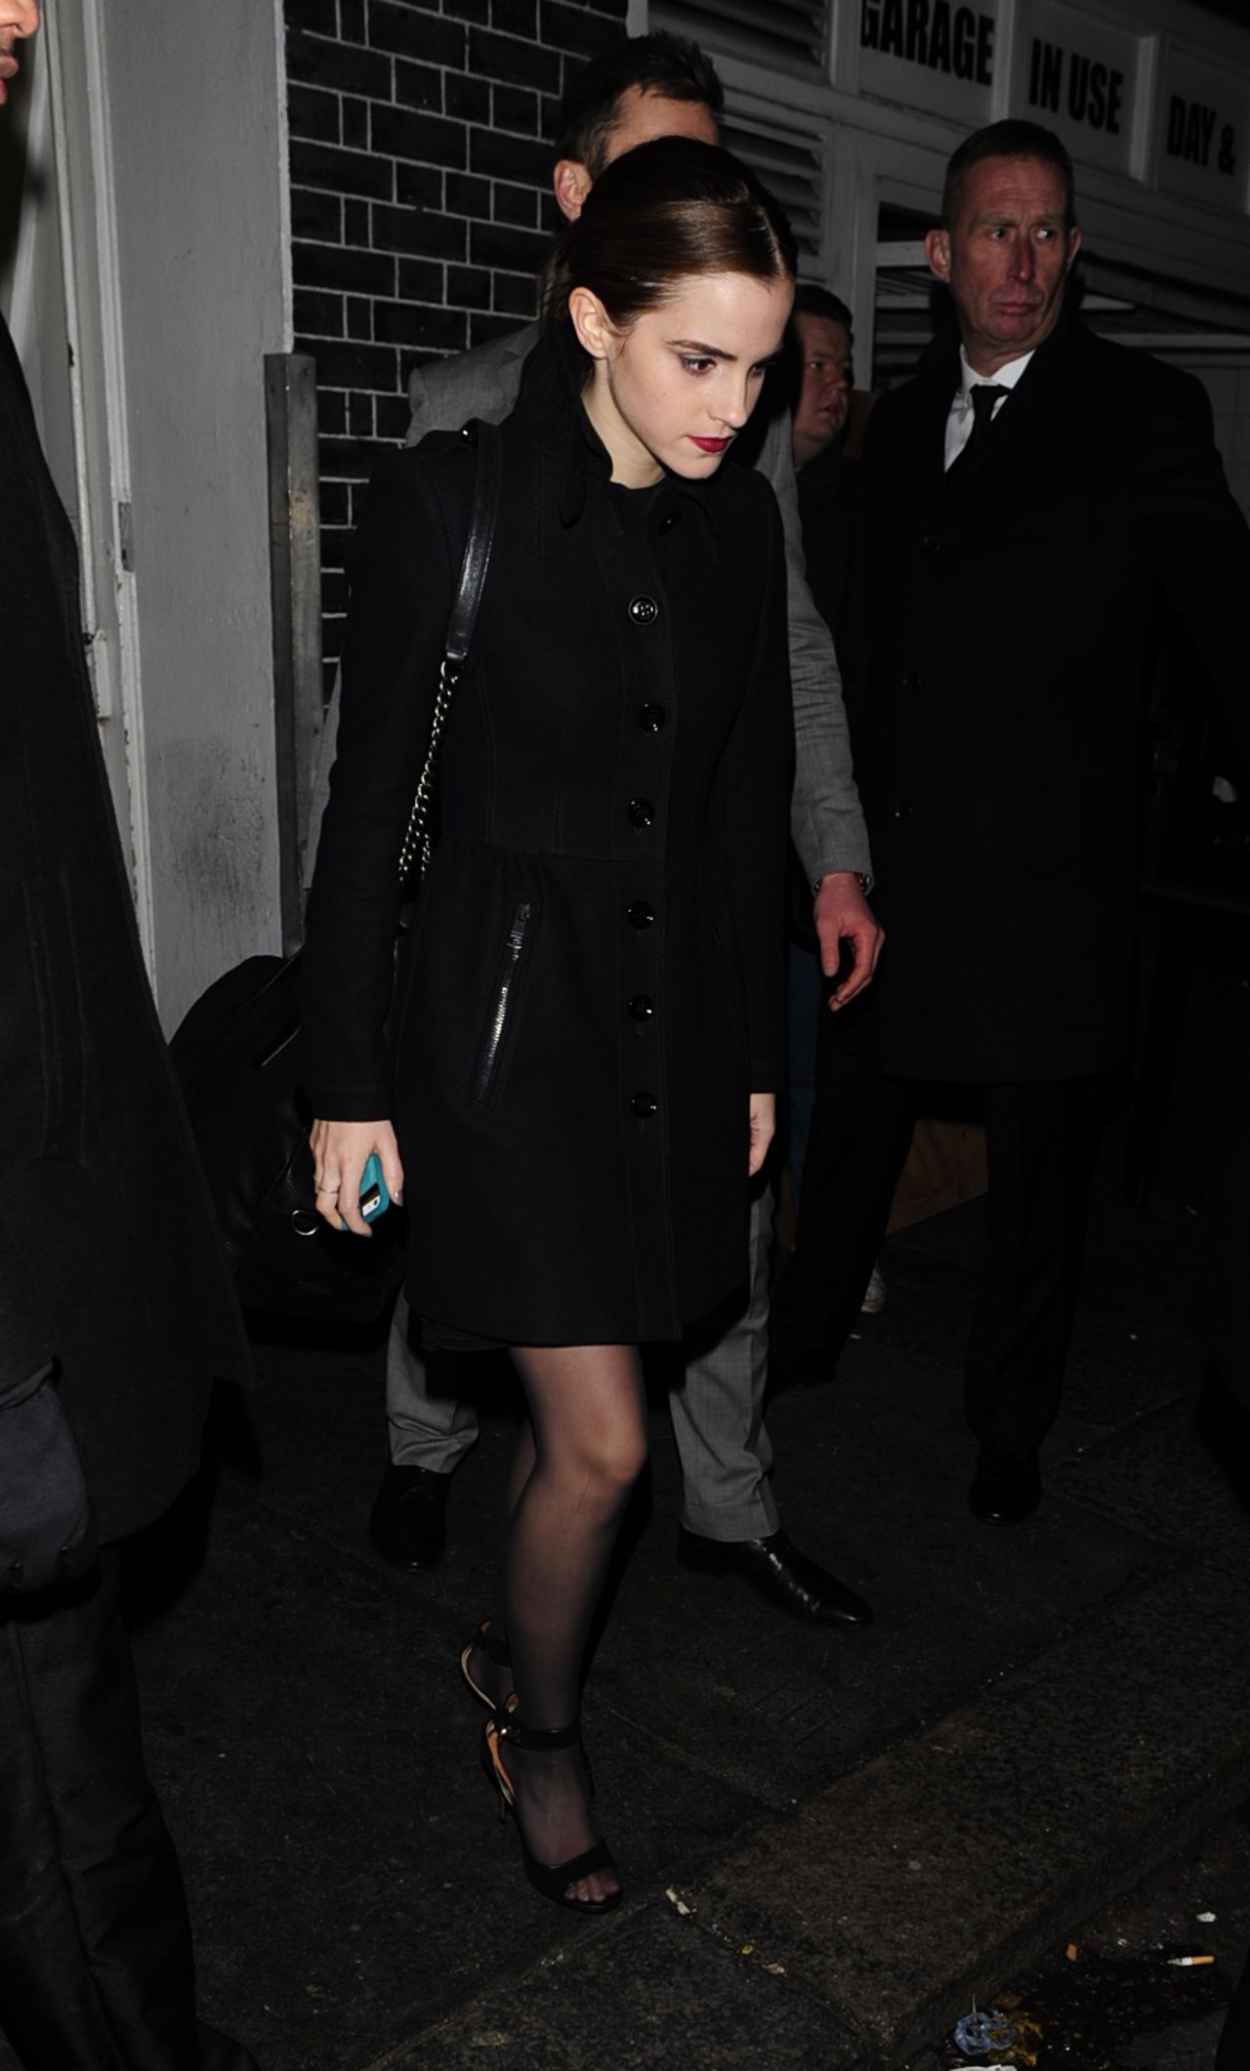 Emma Watson Leaving Lady Gagas Private Gig in London - December 2015-4